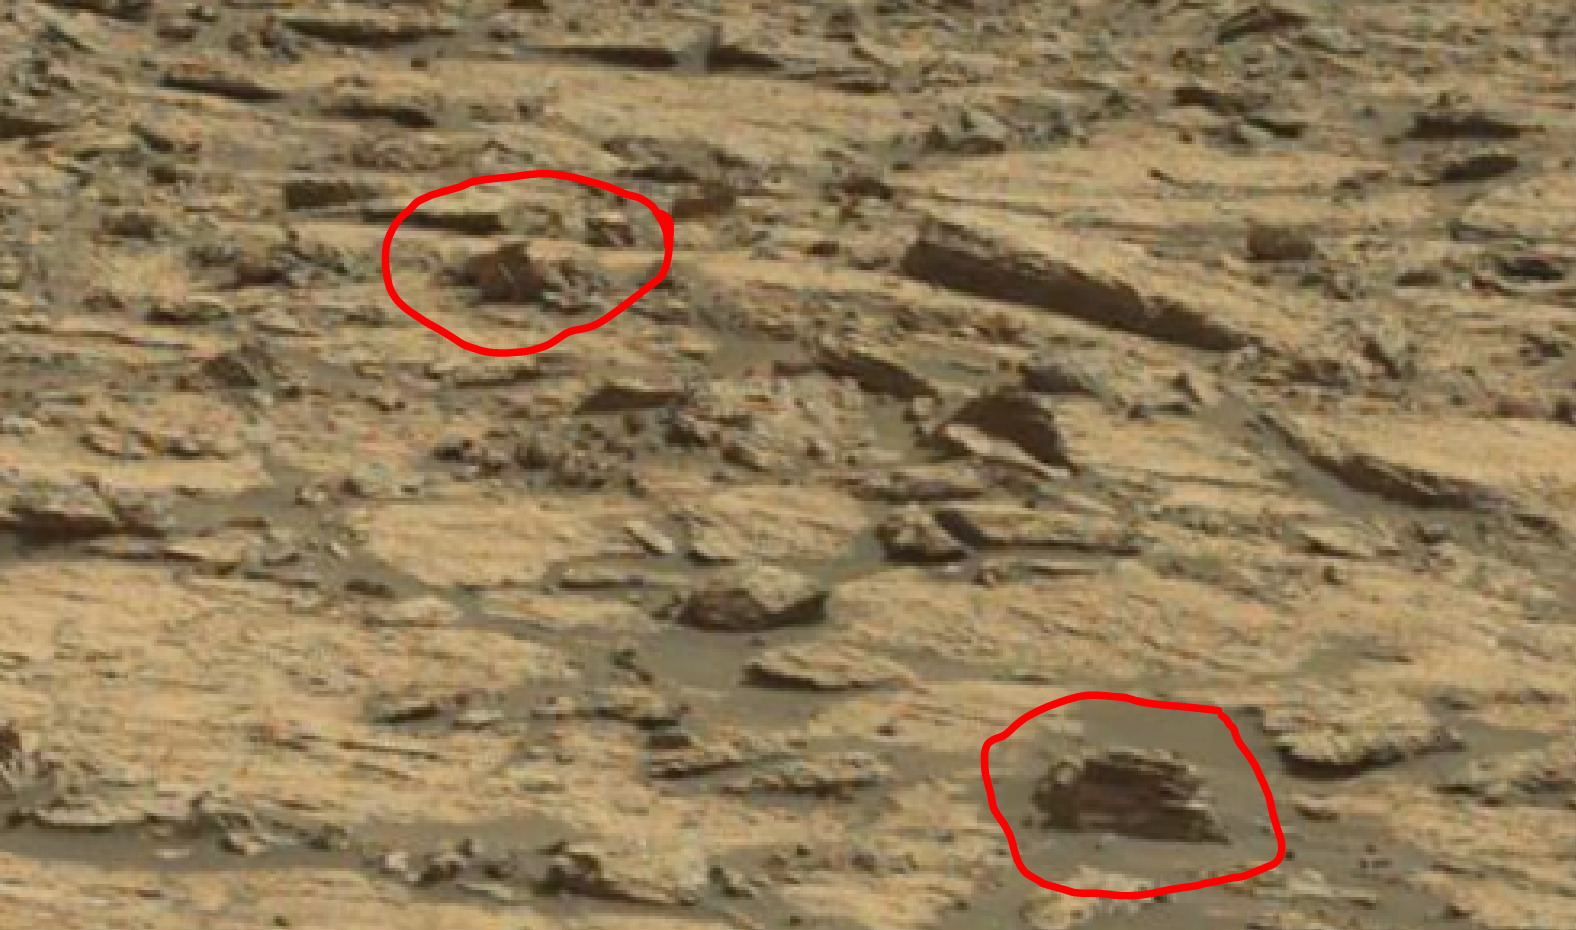 mars sol 1435 anomaly artifacts 1 was life on mars